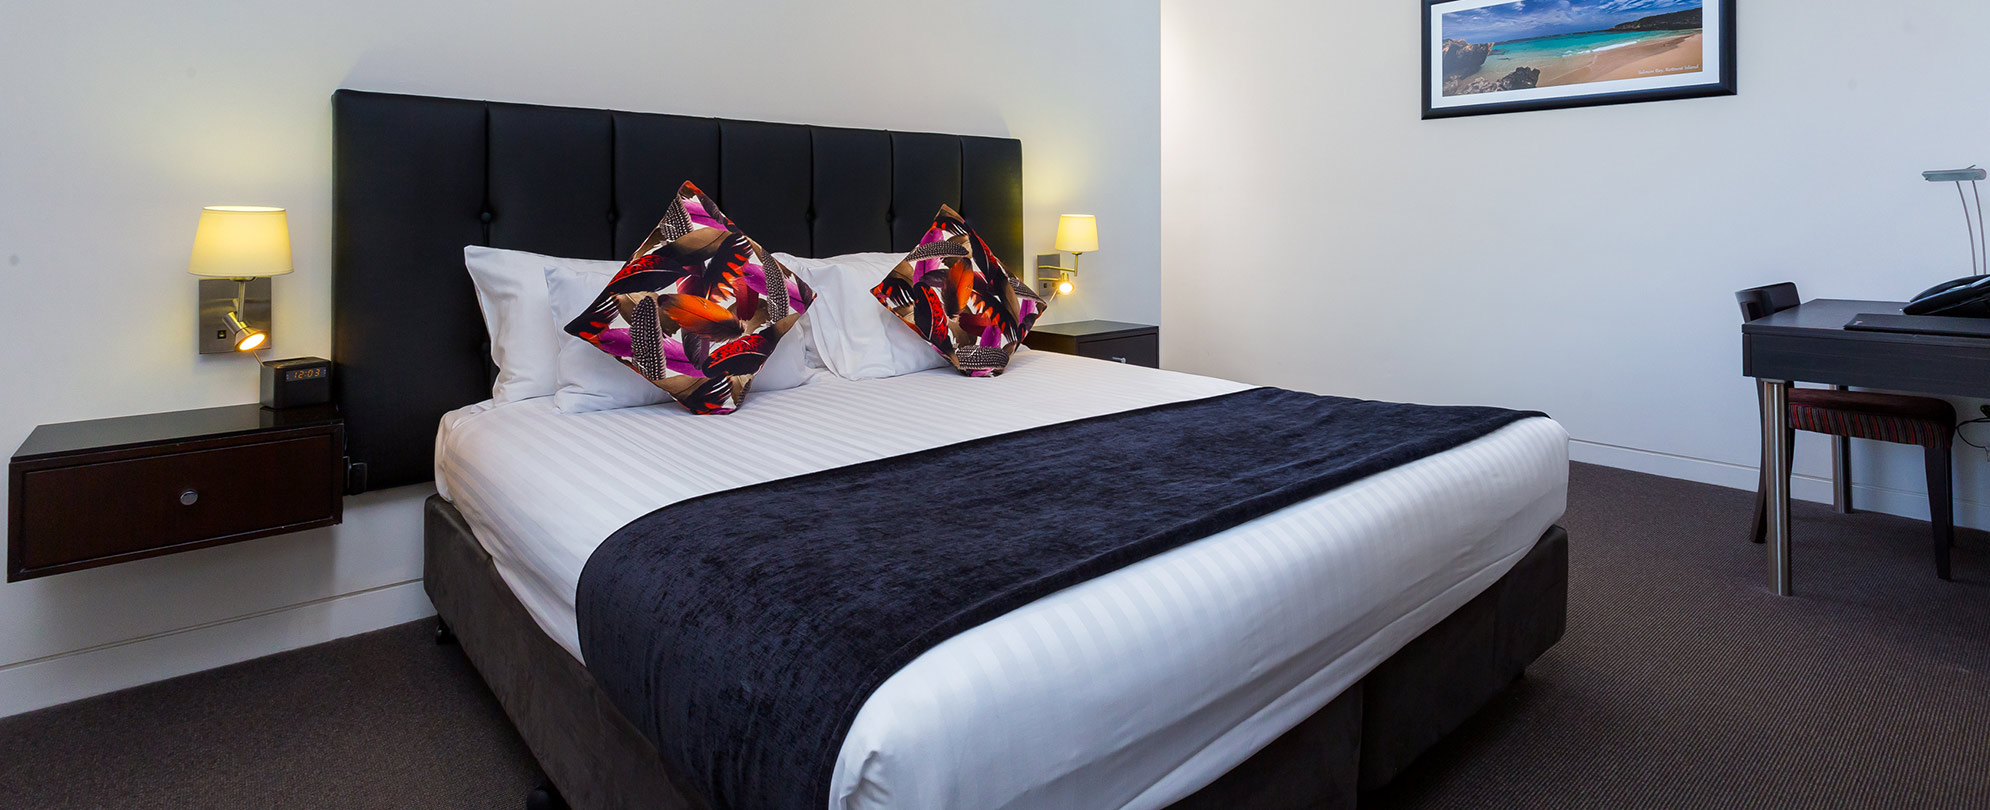 A king bed neatly made inside a studio suite at Club Wyndham Perth.